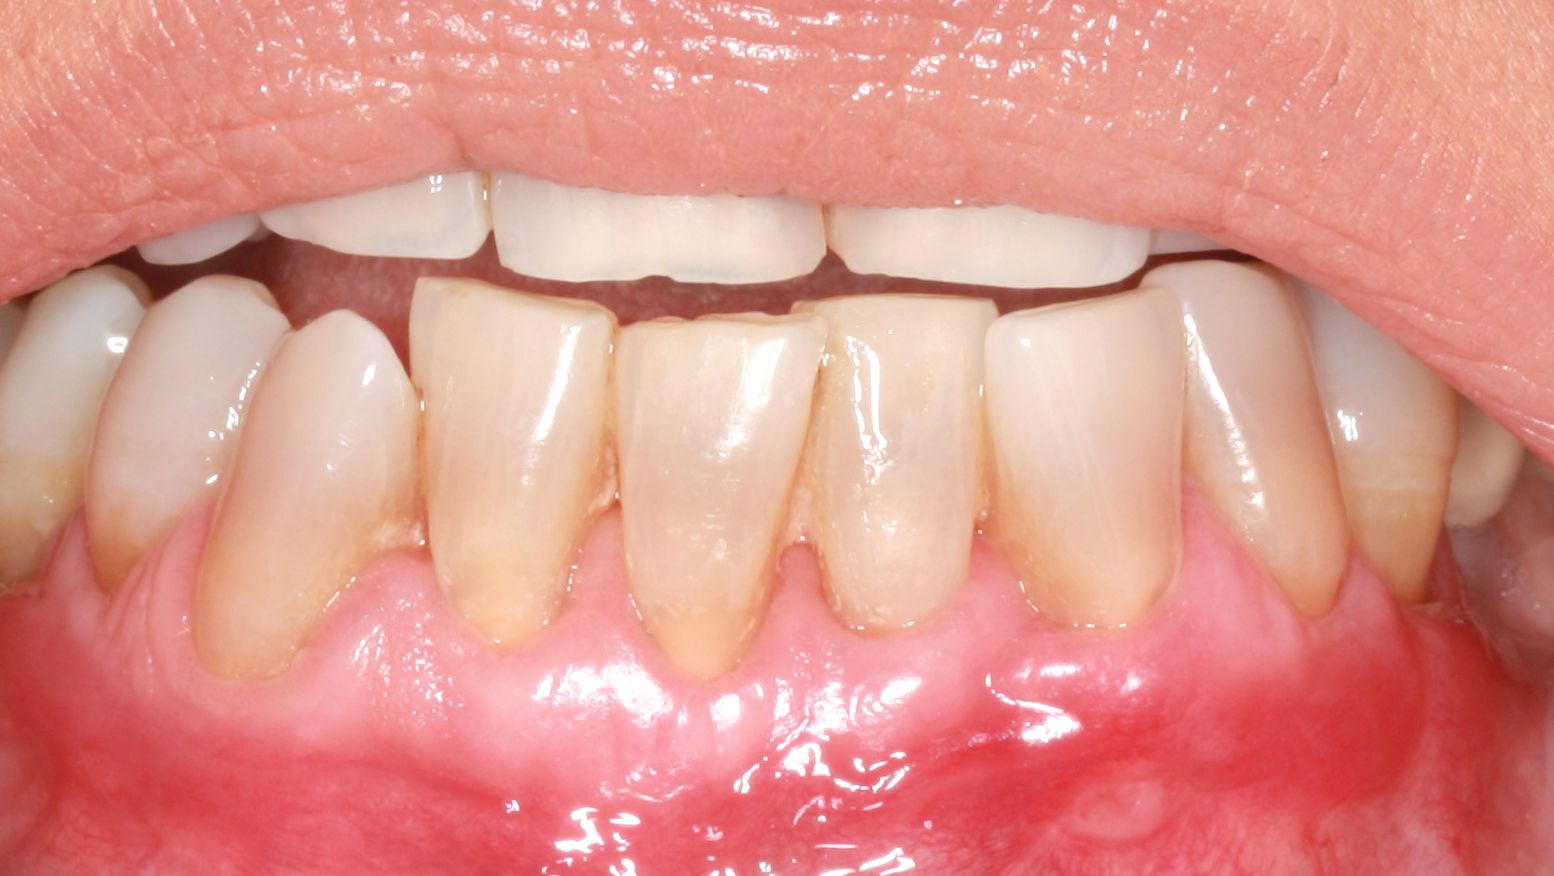 After treatment of receding gums using the Pinhole technique